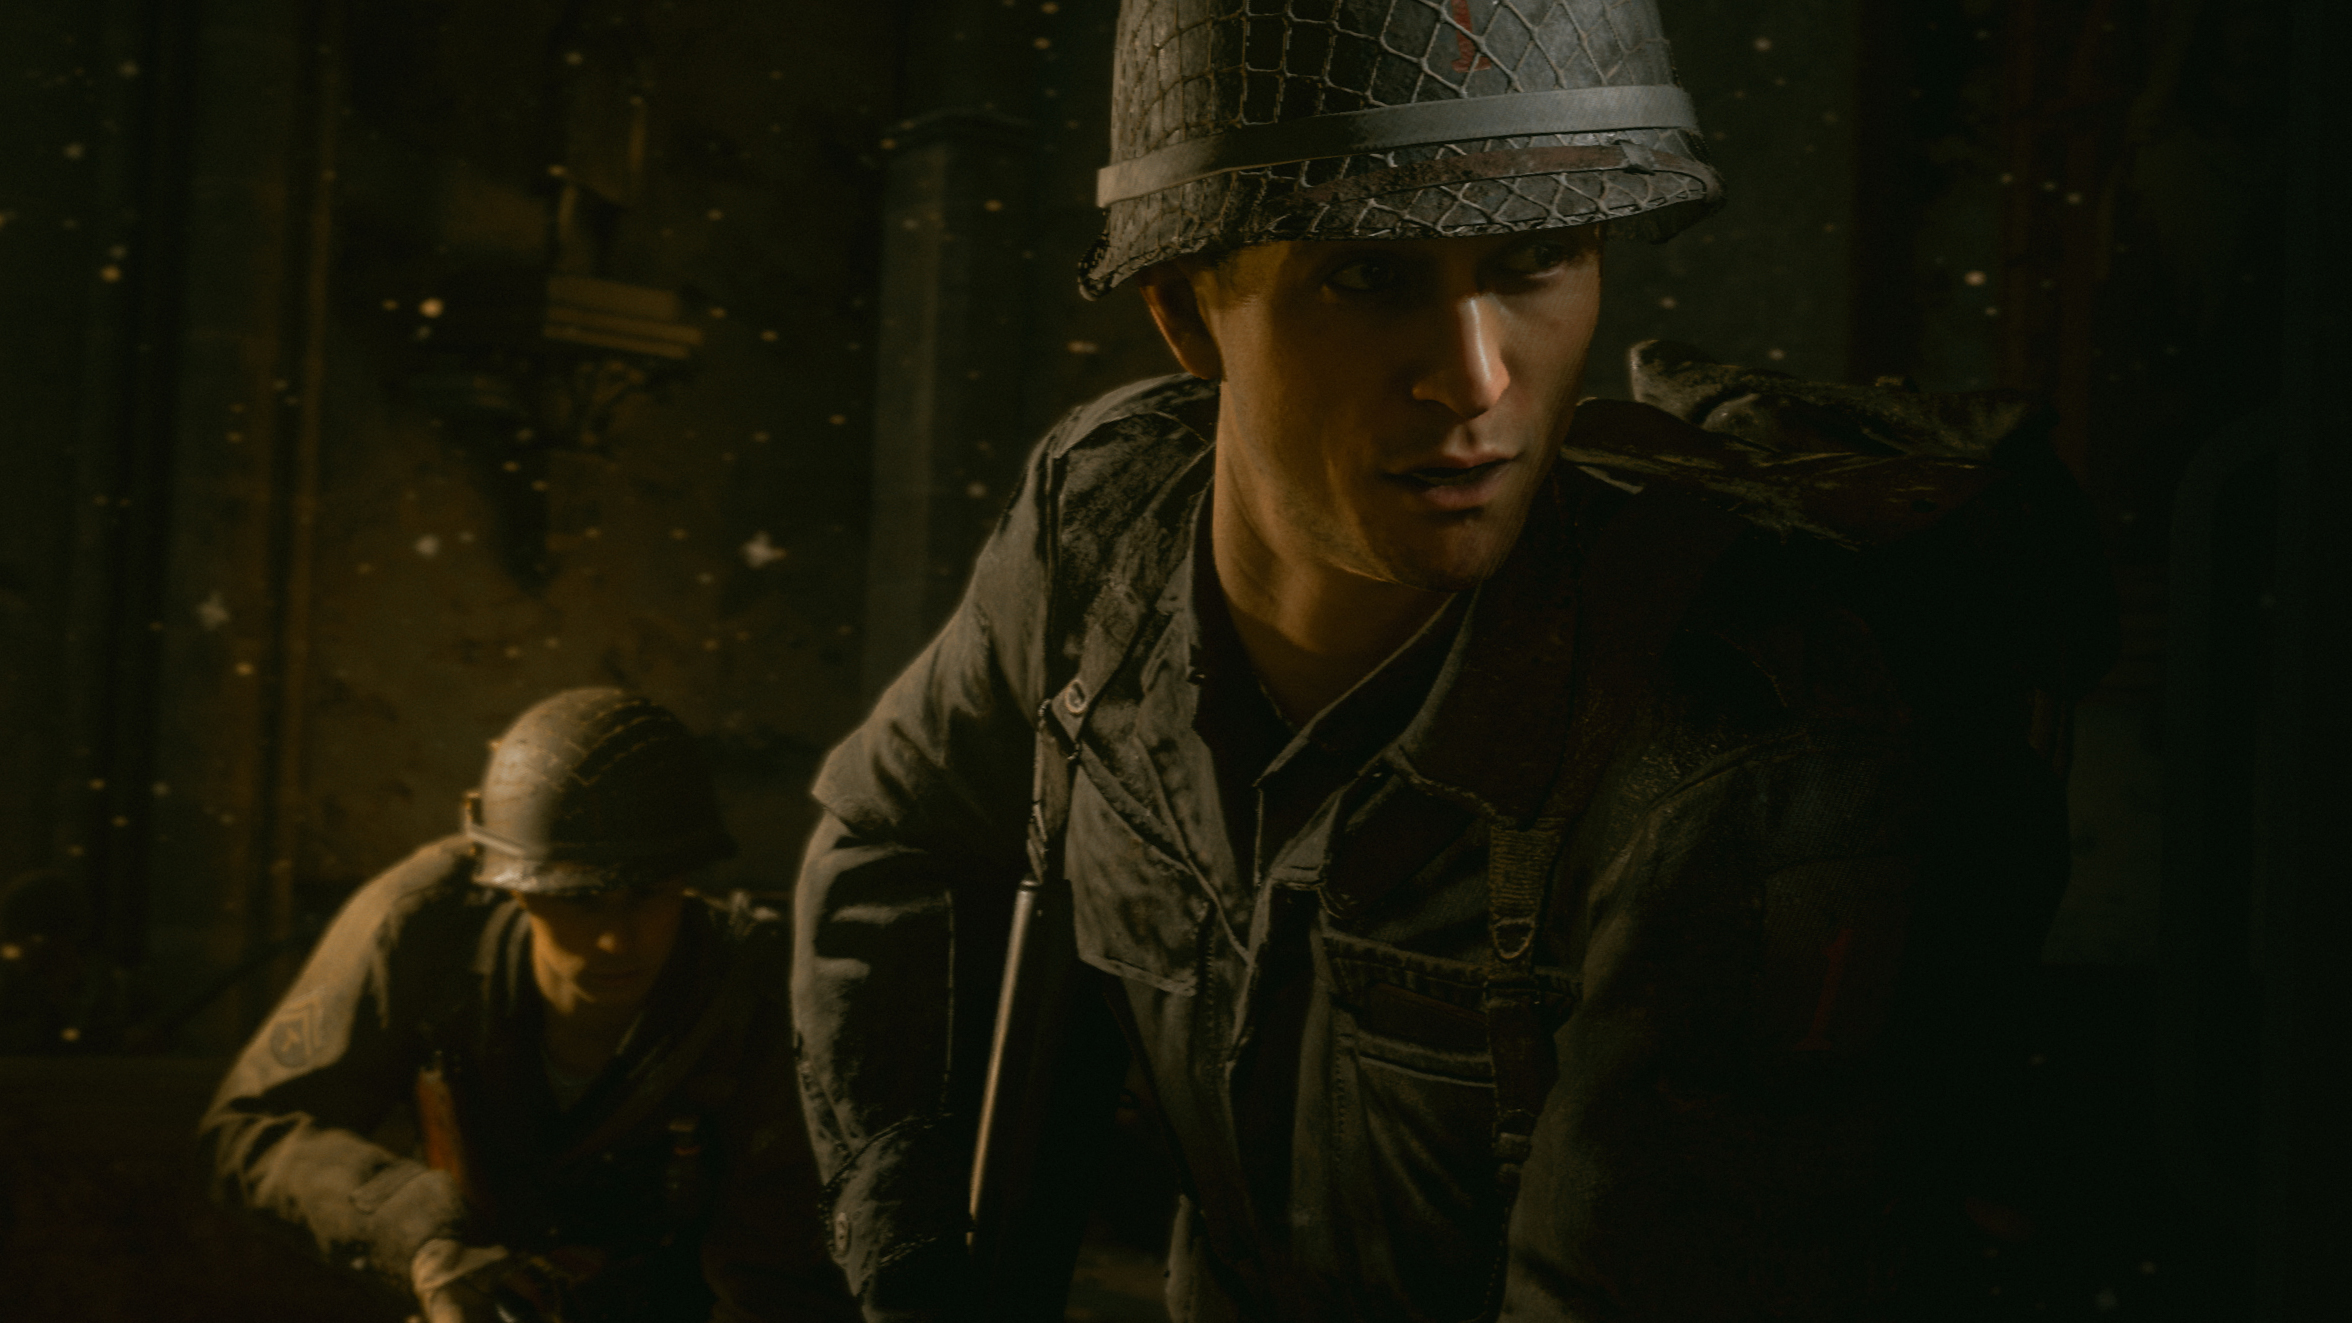 Mastering the Commando Division in Call of Duty: WWII